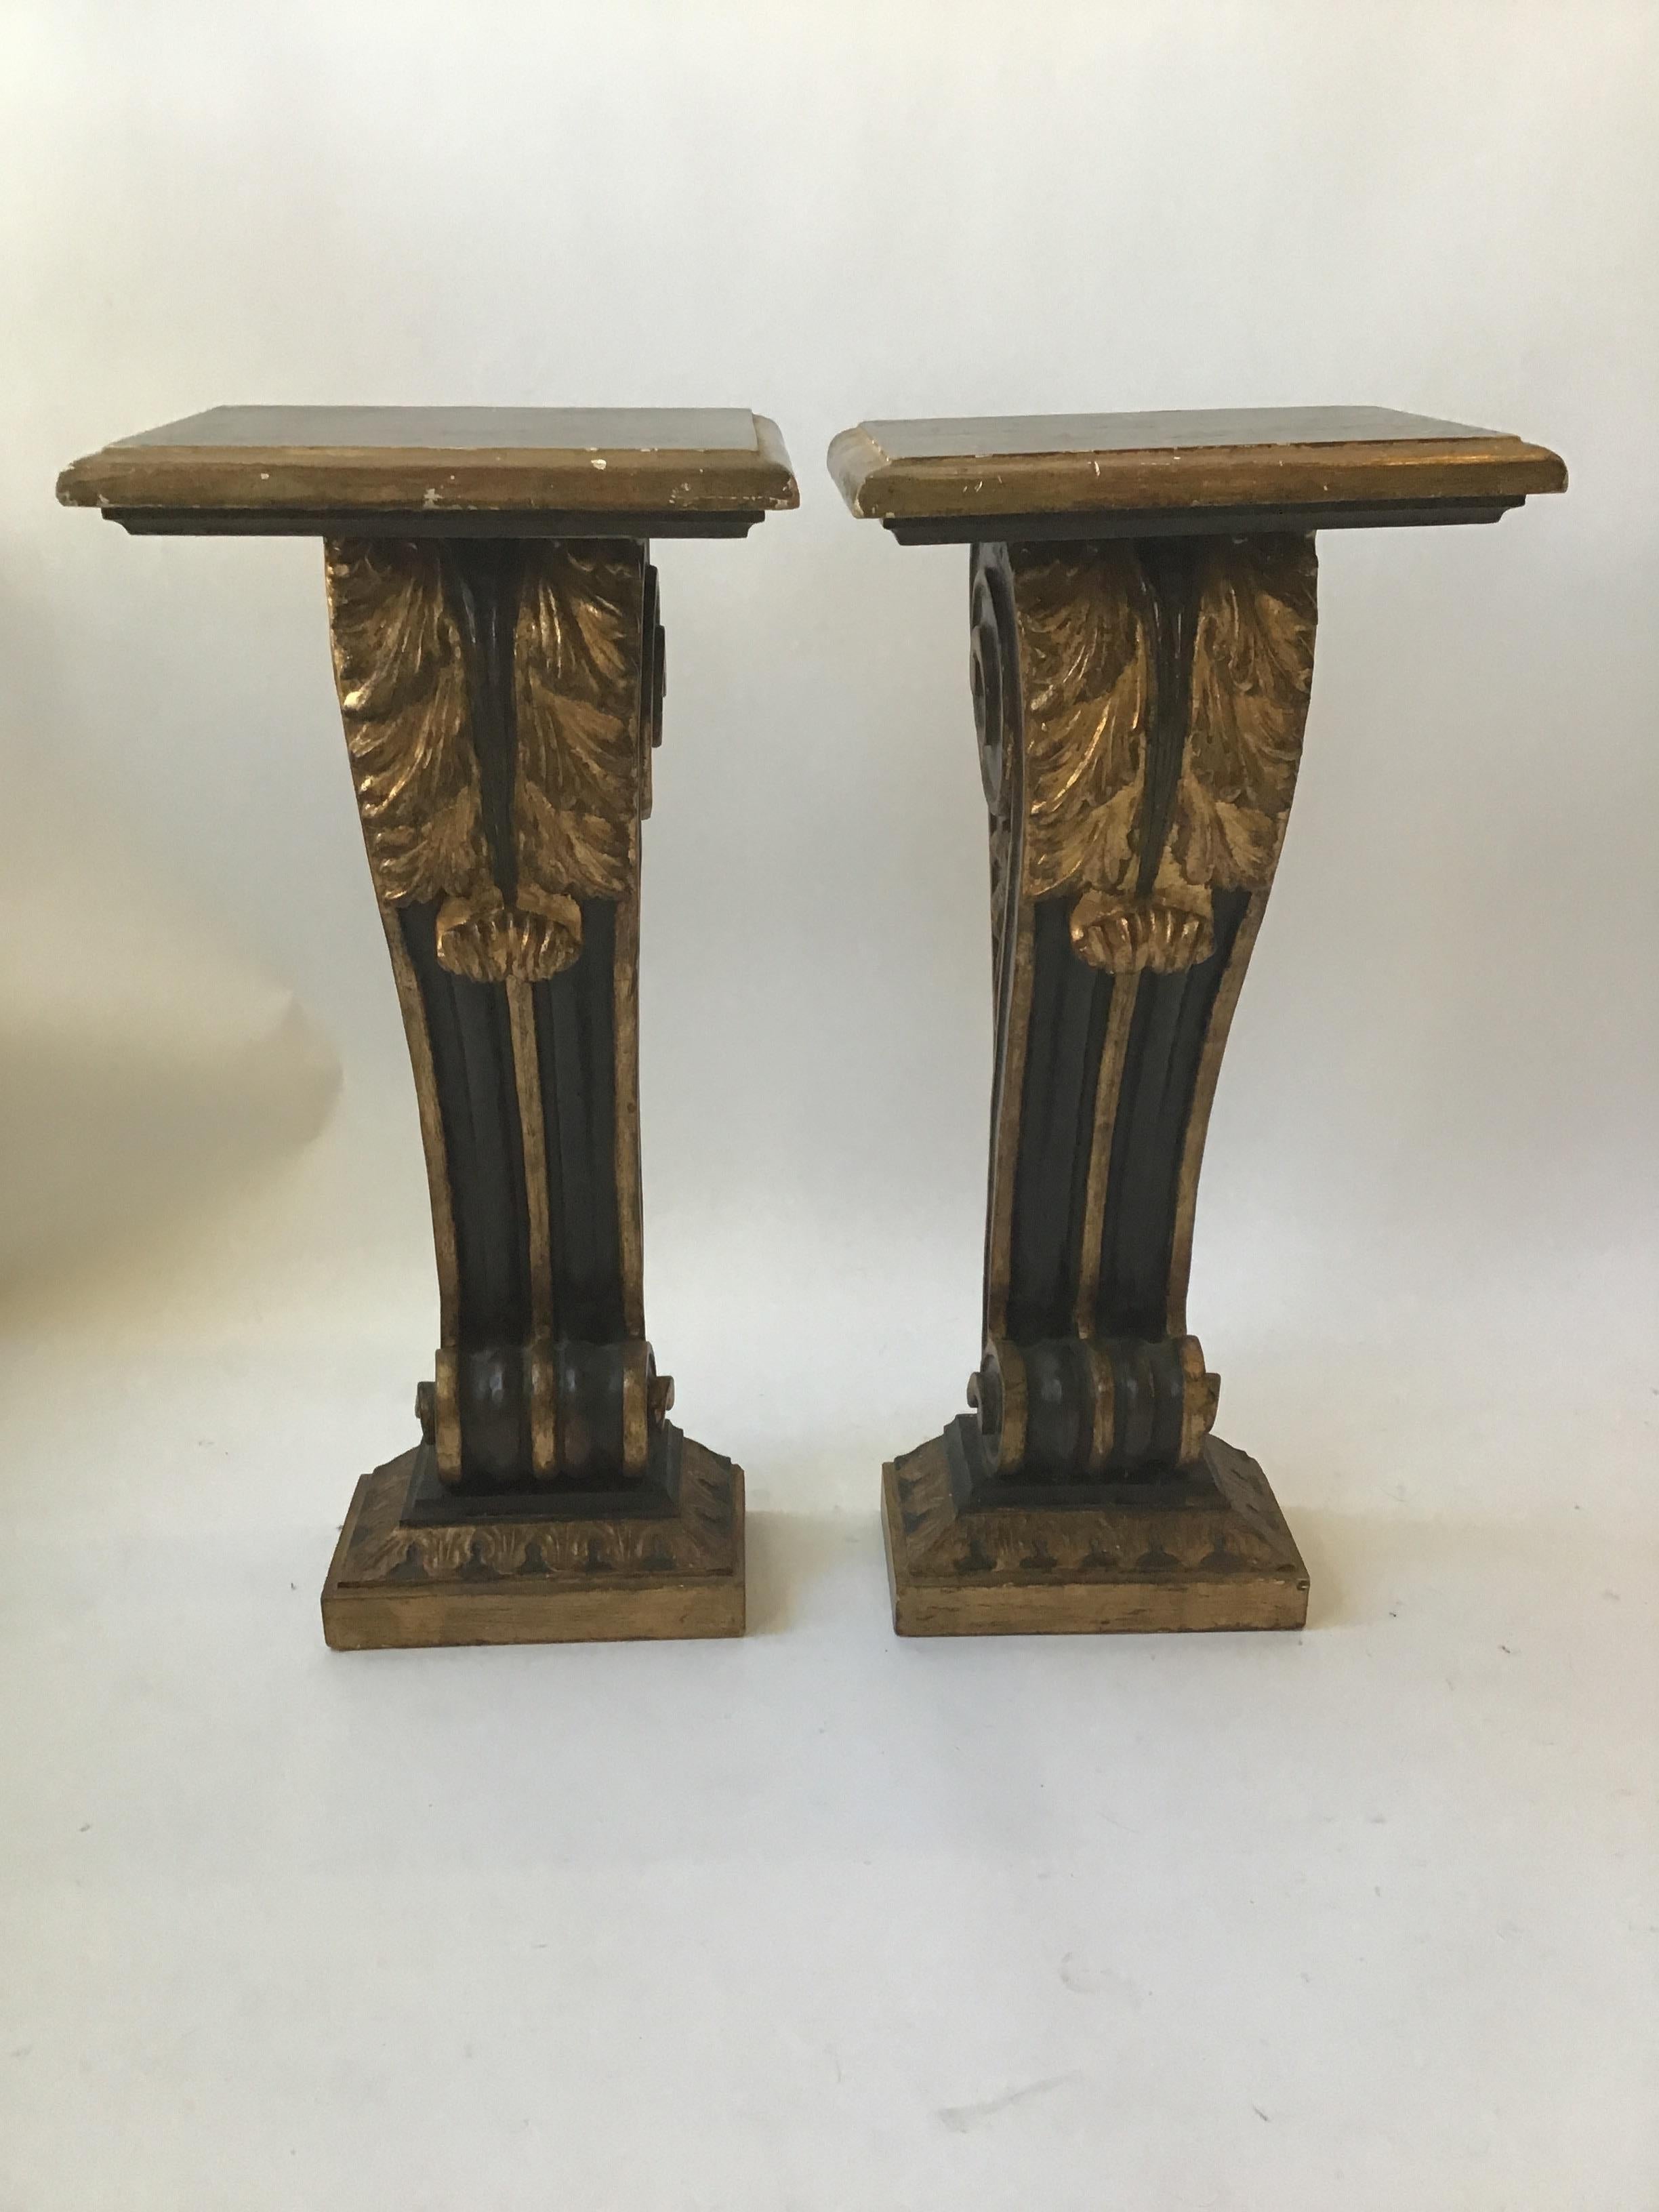 Pair of 1950s giltwood French Empire style consoles.
You can add marble, or wood tops, to make them any size top as you wish.